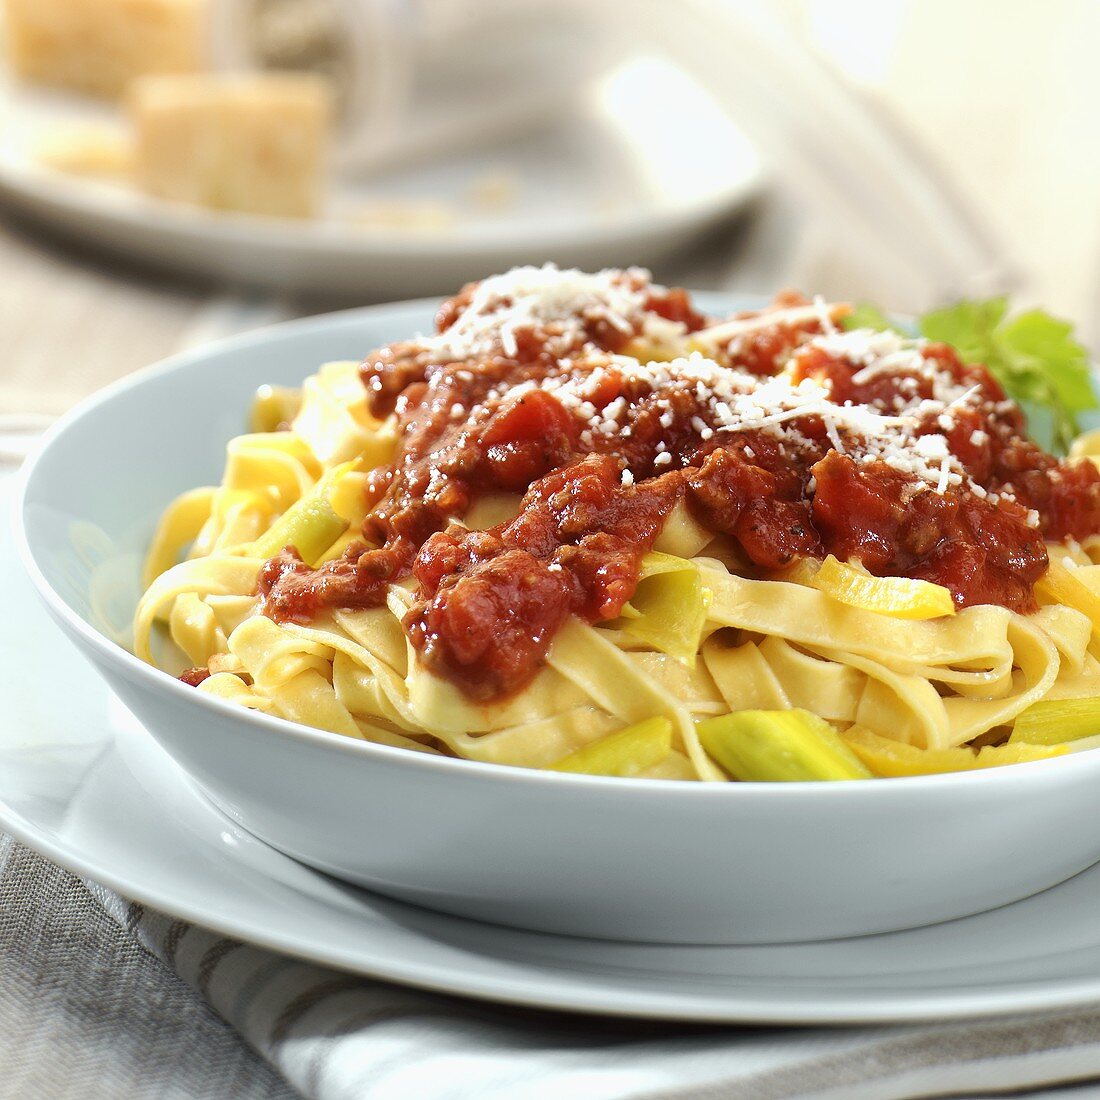 Ribbon pasta with meat sauce